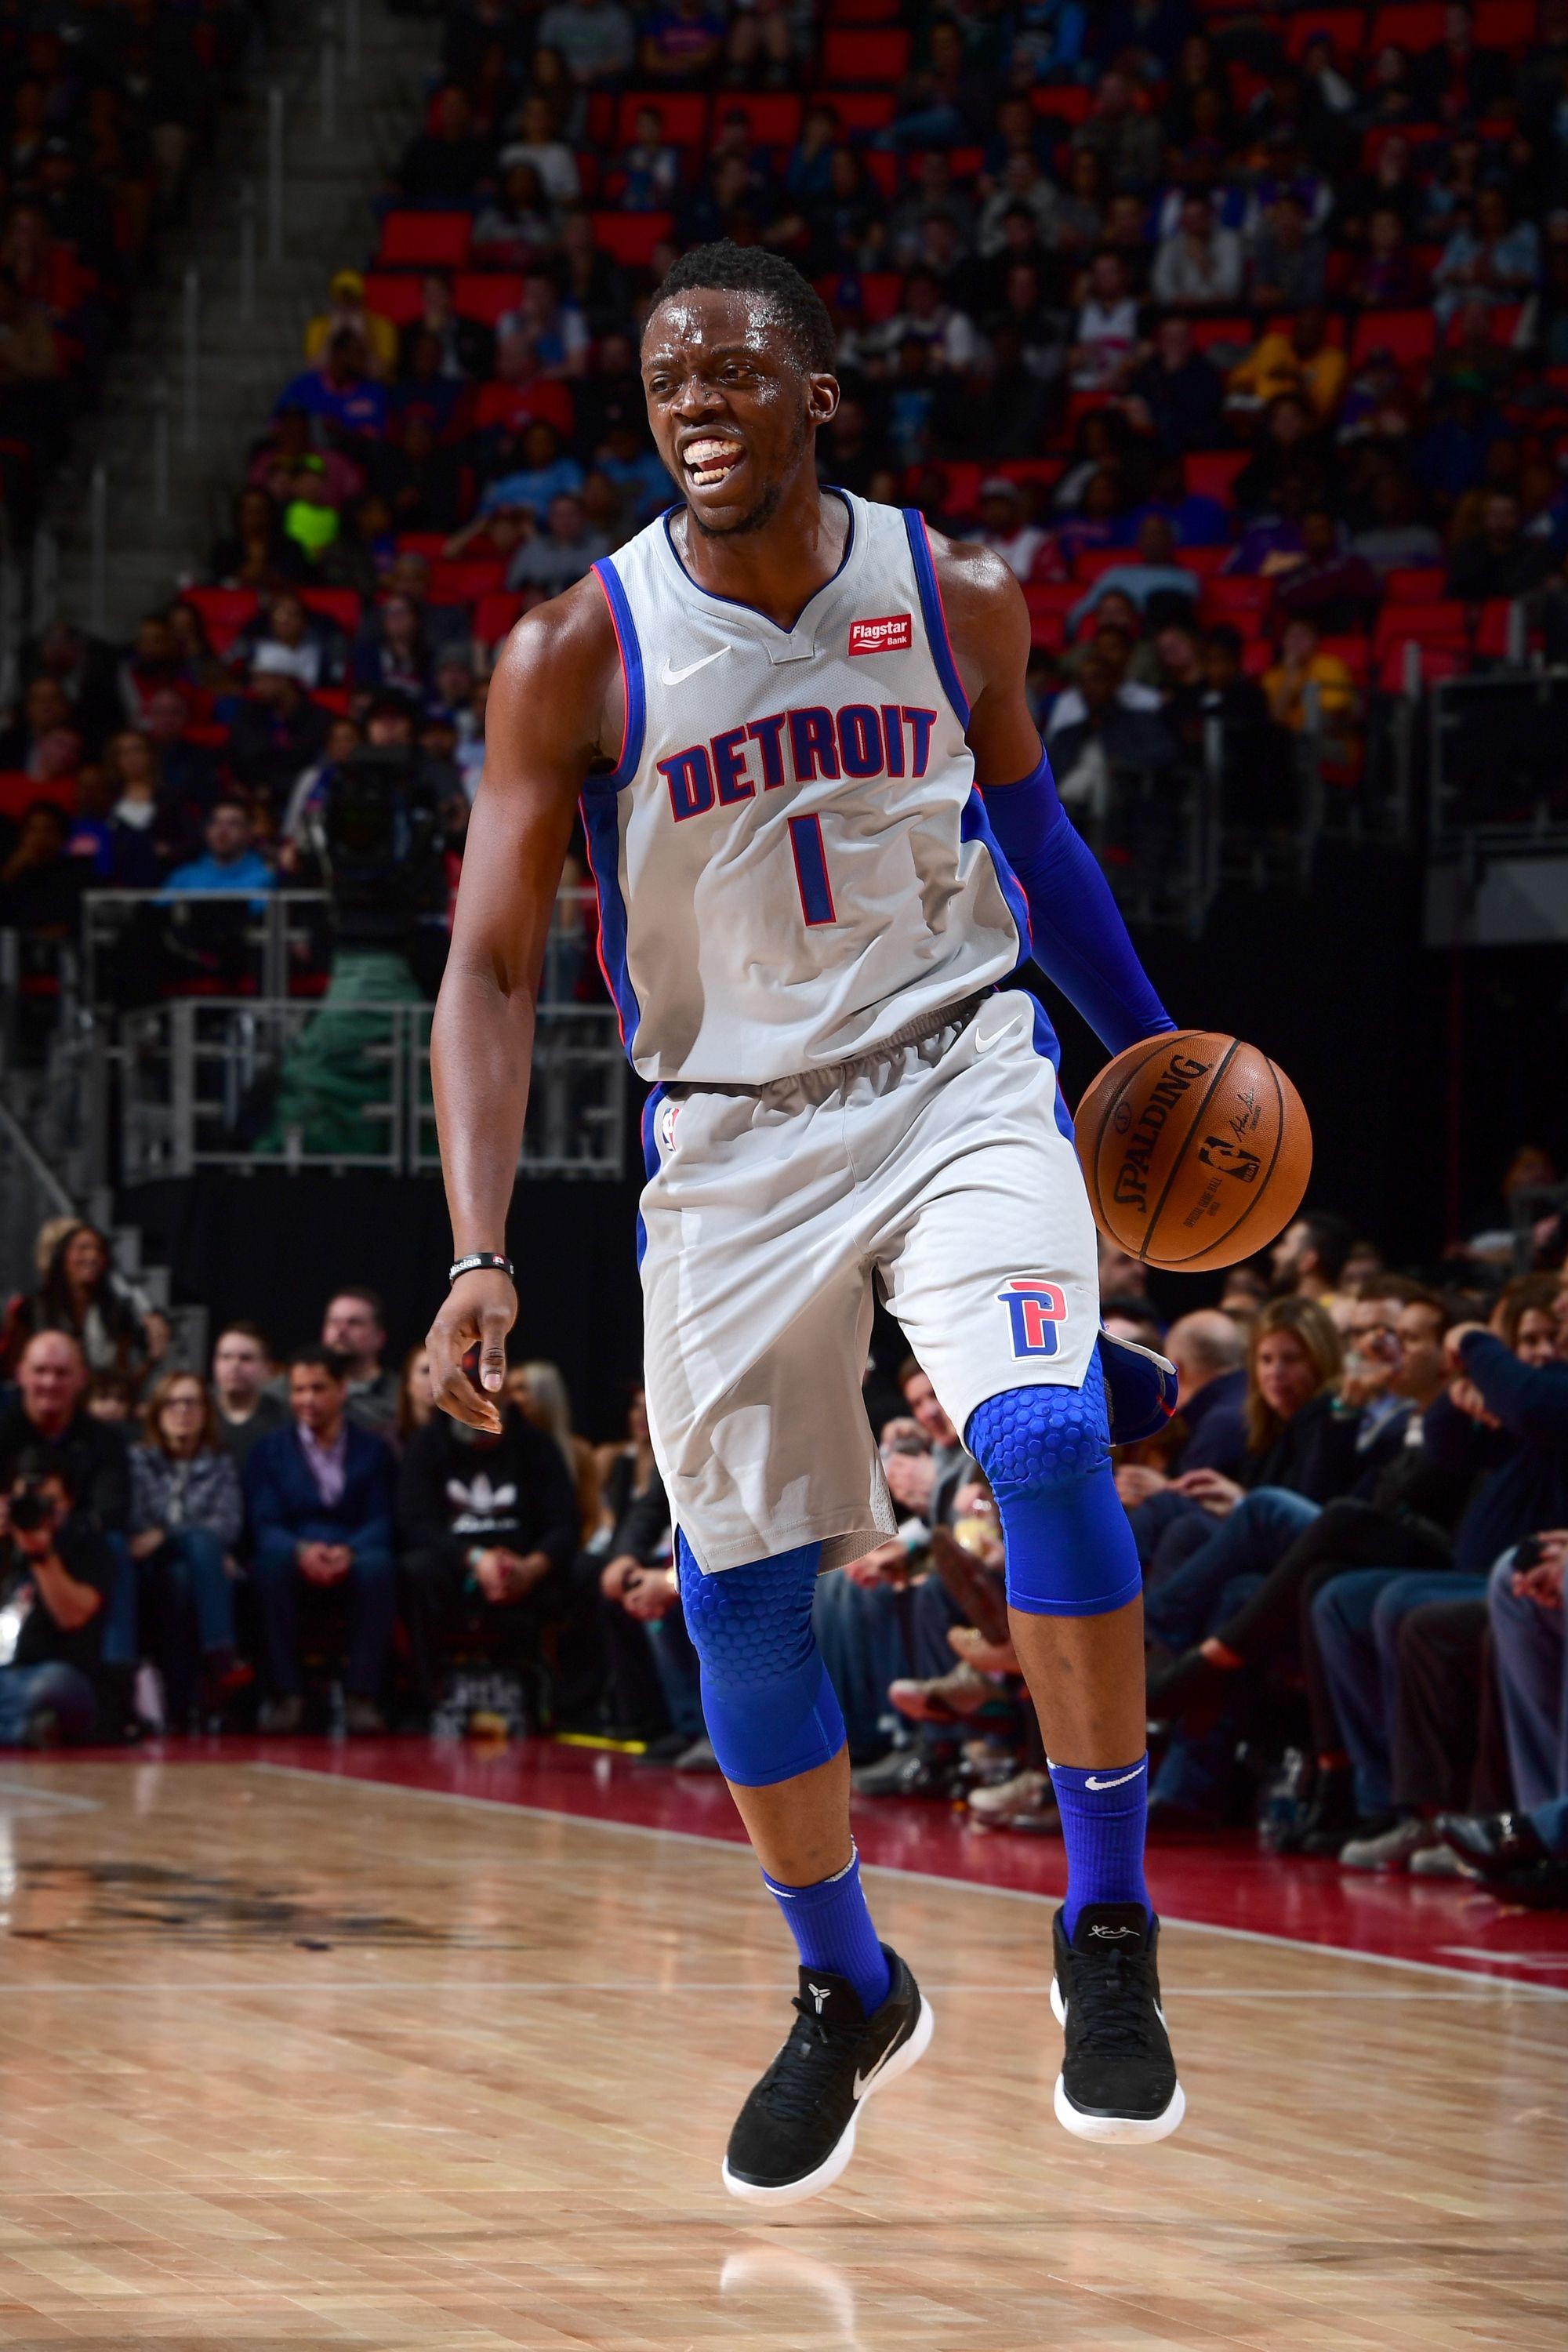 What effect does Reggie Jackson’s return have and what can we expect?